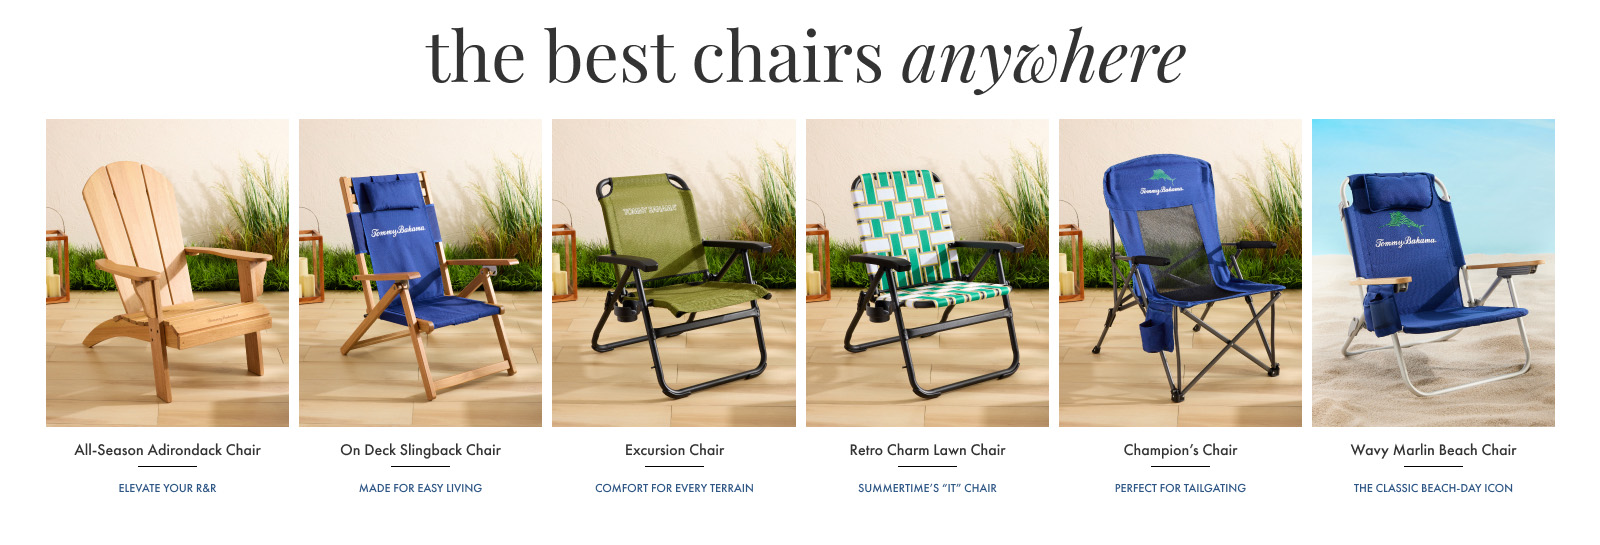 The best chairs anywhere